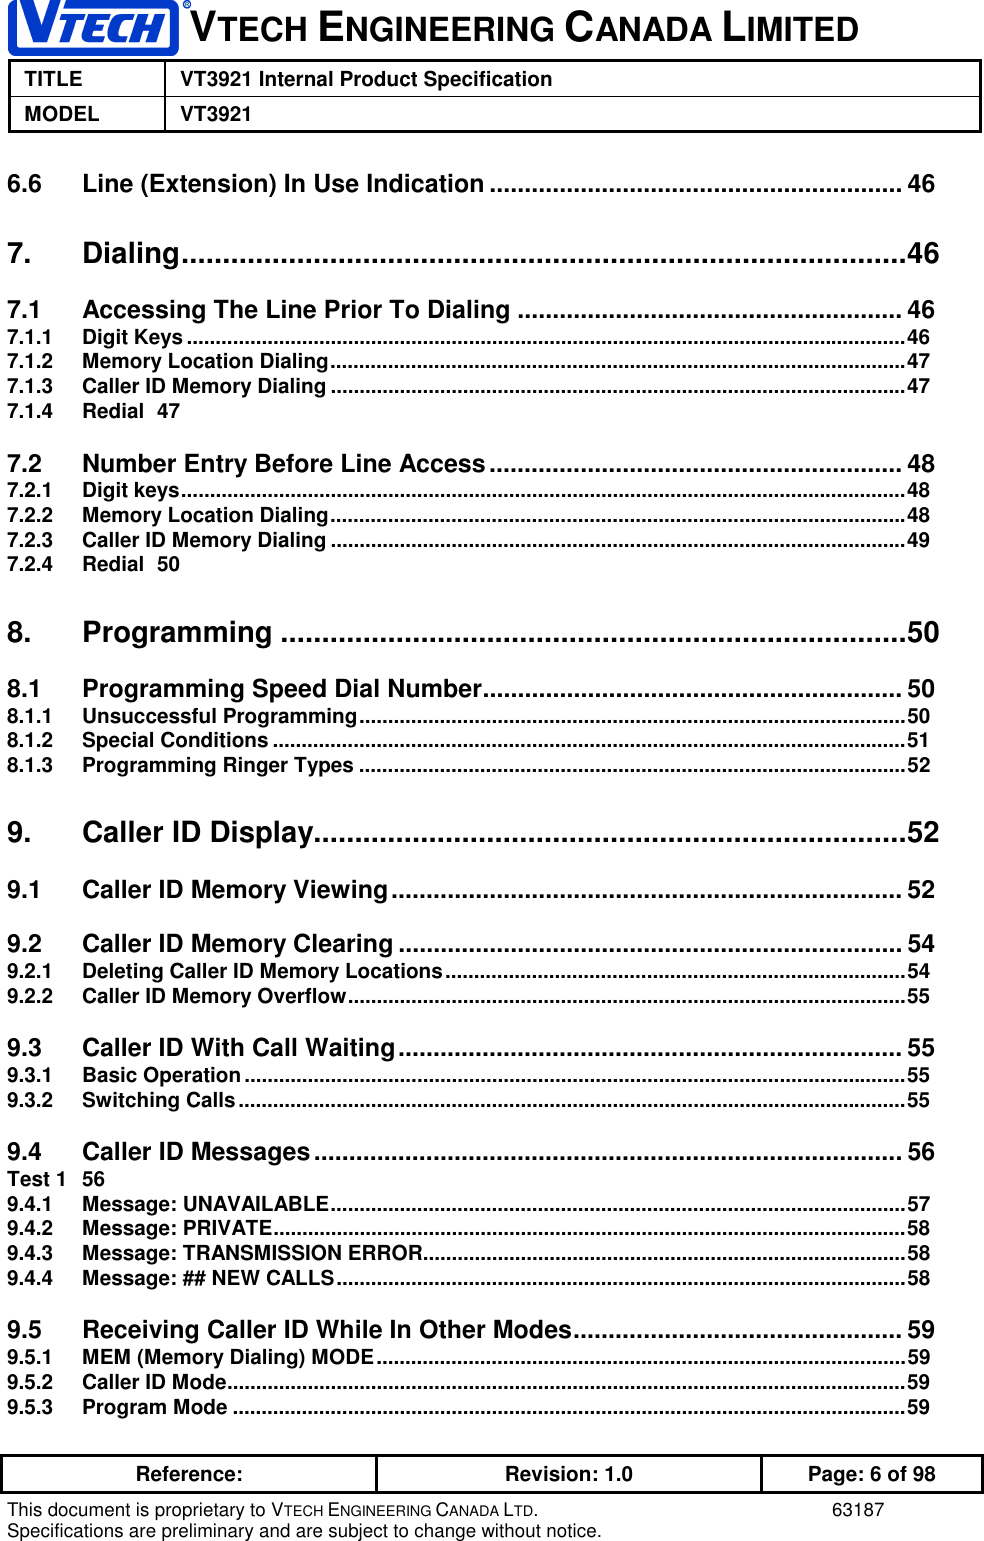 VTECH ENGINEERING CANADA LIMITEDTITLE VT3921 Internal Product SpecificationMODEL VT3921Reference: Revision: 1.0 Page: 6 of 98This document is proprietary to VTECH ENGINEERING CANADA LTD. 63187Specifications are preliminary and are subject to change without notice.6.6 Line (Extension) In Use Indication ........................................................... 467. Dialing........................................................................................467.1 Accessing The Line Prior To Dialing ....................................................... 467.1.1 Digit Keys.............................................................................................................................467.1.2 Memory Location Dialing....................................................................................................477.1.3 Caller ID Memory Dialing ....................................................................................................477.1.4 Redial 477.2 Number Entry Before Line Access........................................................... 487.2.1 Digit keys..............................................................................................................................487.2.2 Memory Location Dialing....................................................................................................487.2.3 Caller ID Memory Dialing ....................................................................................................497.2.4 Redial 508. Programming ............................................................................508.1 Programming Speed Dial Number............................................................ 508.1.1 Unsuccessful Programming...............................................................................................508.1.2 Special Conditions ..............................................................................................................518.1.3 Programming Ringer Types ...............................................................................................529. Caller ID Display........................................................................529.1 Caller ID Memory Viewing......................................................................... 529.2 Caller ID Memory Clearing ........................................................................ 549.2.1 Deleting Caller ID Memory Locations................................................................................549.2.2 Caller ID Memory Overflow.................................................................................................559.3 Caller ID With Call Waiting........................................................................ 559.3.1 Basic Operation...................................................................................................................559.3.2 Switching Calls....................................................................................................................559.4 Caller ID Messages.................................................................................... 56Test 1 569.4.1 Message: UNAVAILABLE....................................................................................................579.4.2 Message: PRIVATE..............................................................................................................589.4.3 Message: TRANSMISSION ERROR....................................................................................589.4.4 Message: ## NEW CALLS...................................................................................................589.5 Receiving Caller ID While In Other Modes............................................... 599.5.1 MEM (Memory Dialing) MODE............................................................................................599.5.2 Caller ID Mode......................................................................................................................599.5.3 Program Mode .....................................................................................................................59